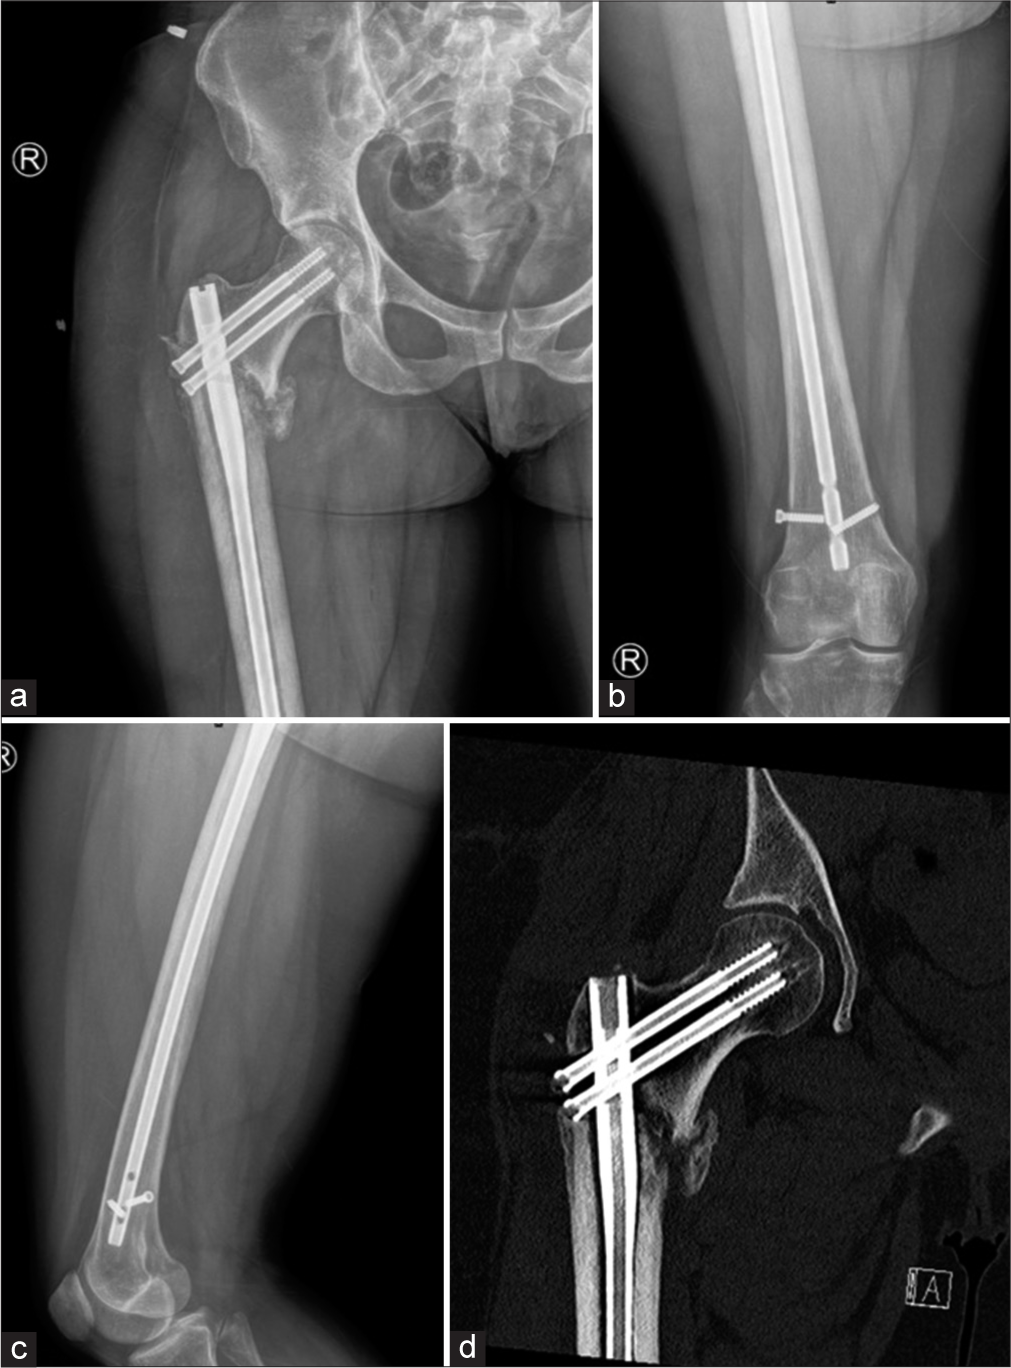 (a) Anterior posterior (AP) view of the right hip (b) AP view of the right thigh and (c) lateral view of the thigh shows lucency in the subtrochanteric region of the lateral femur from early loosening. Distal intramedullary rod- interlocking screw is broken with loosening. Also, the head of the distal of the two proximal screws is located within the fracture as shown in CT (d). Early loosening at the lateral subtrochanteric femur is confirmed on CT.